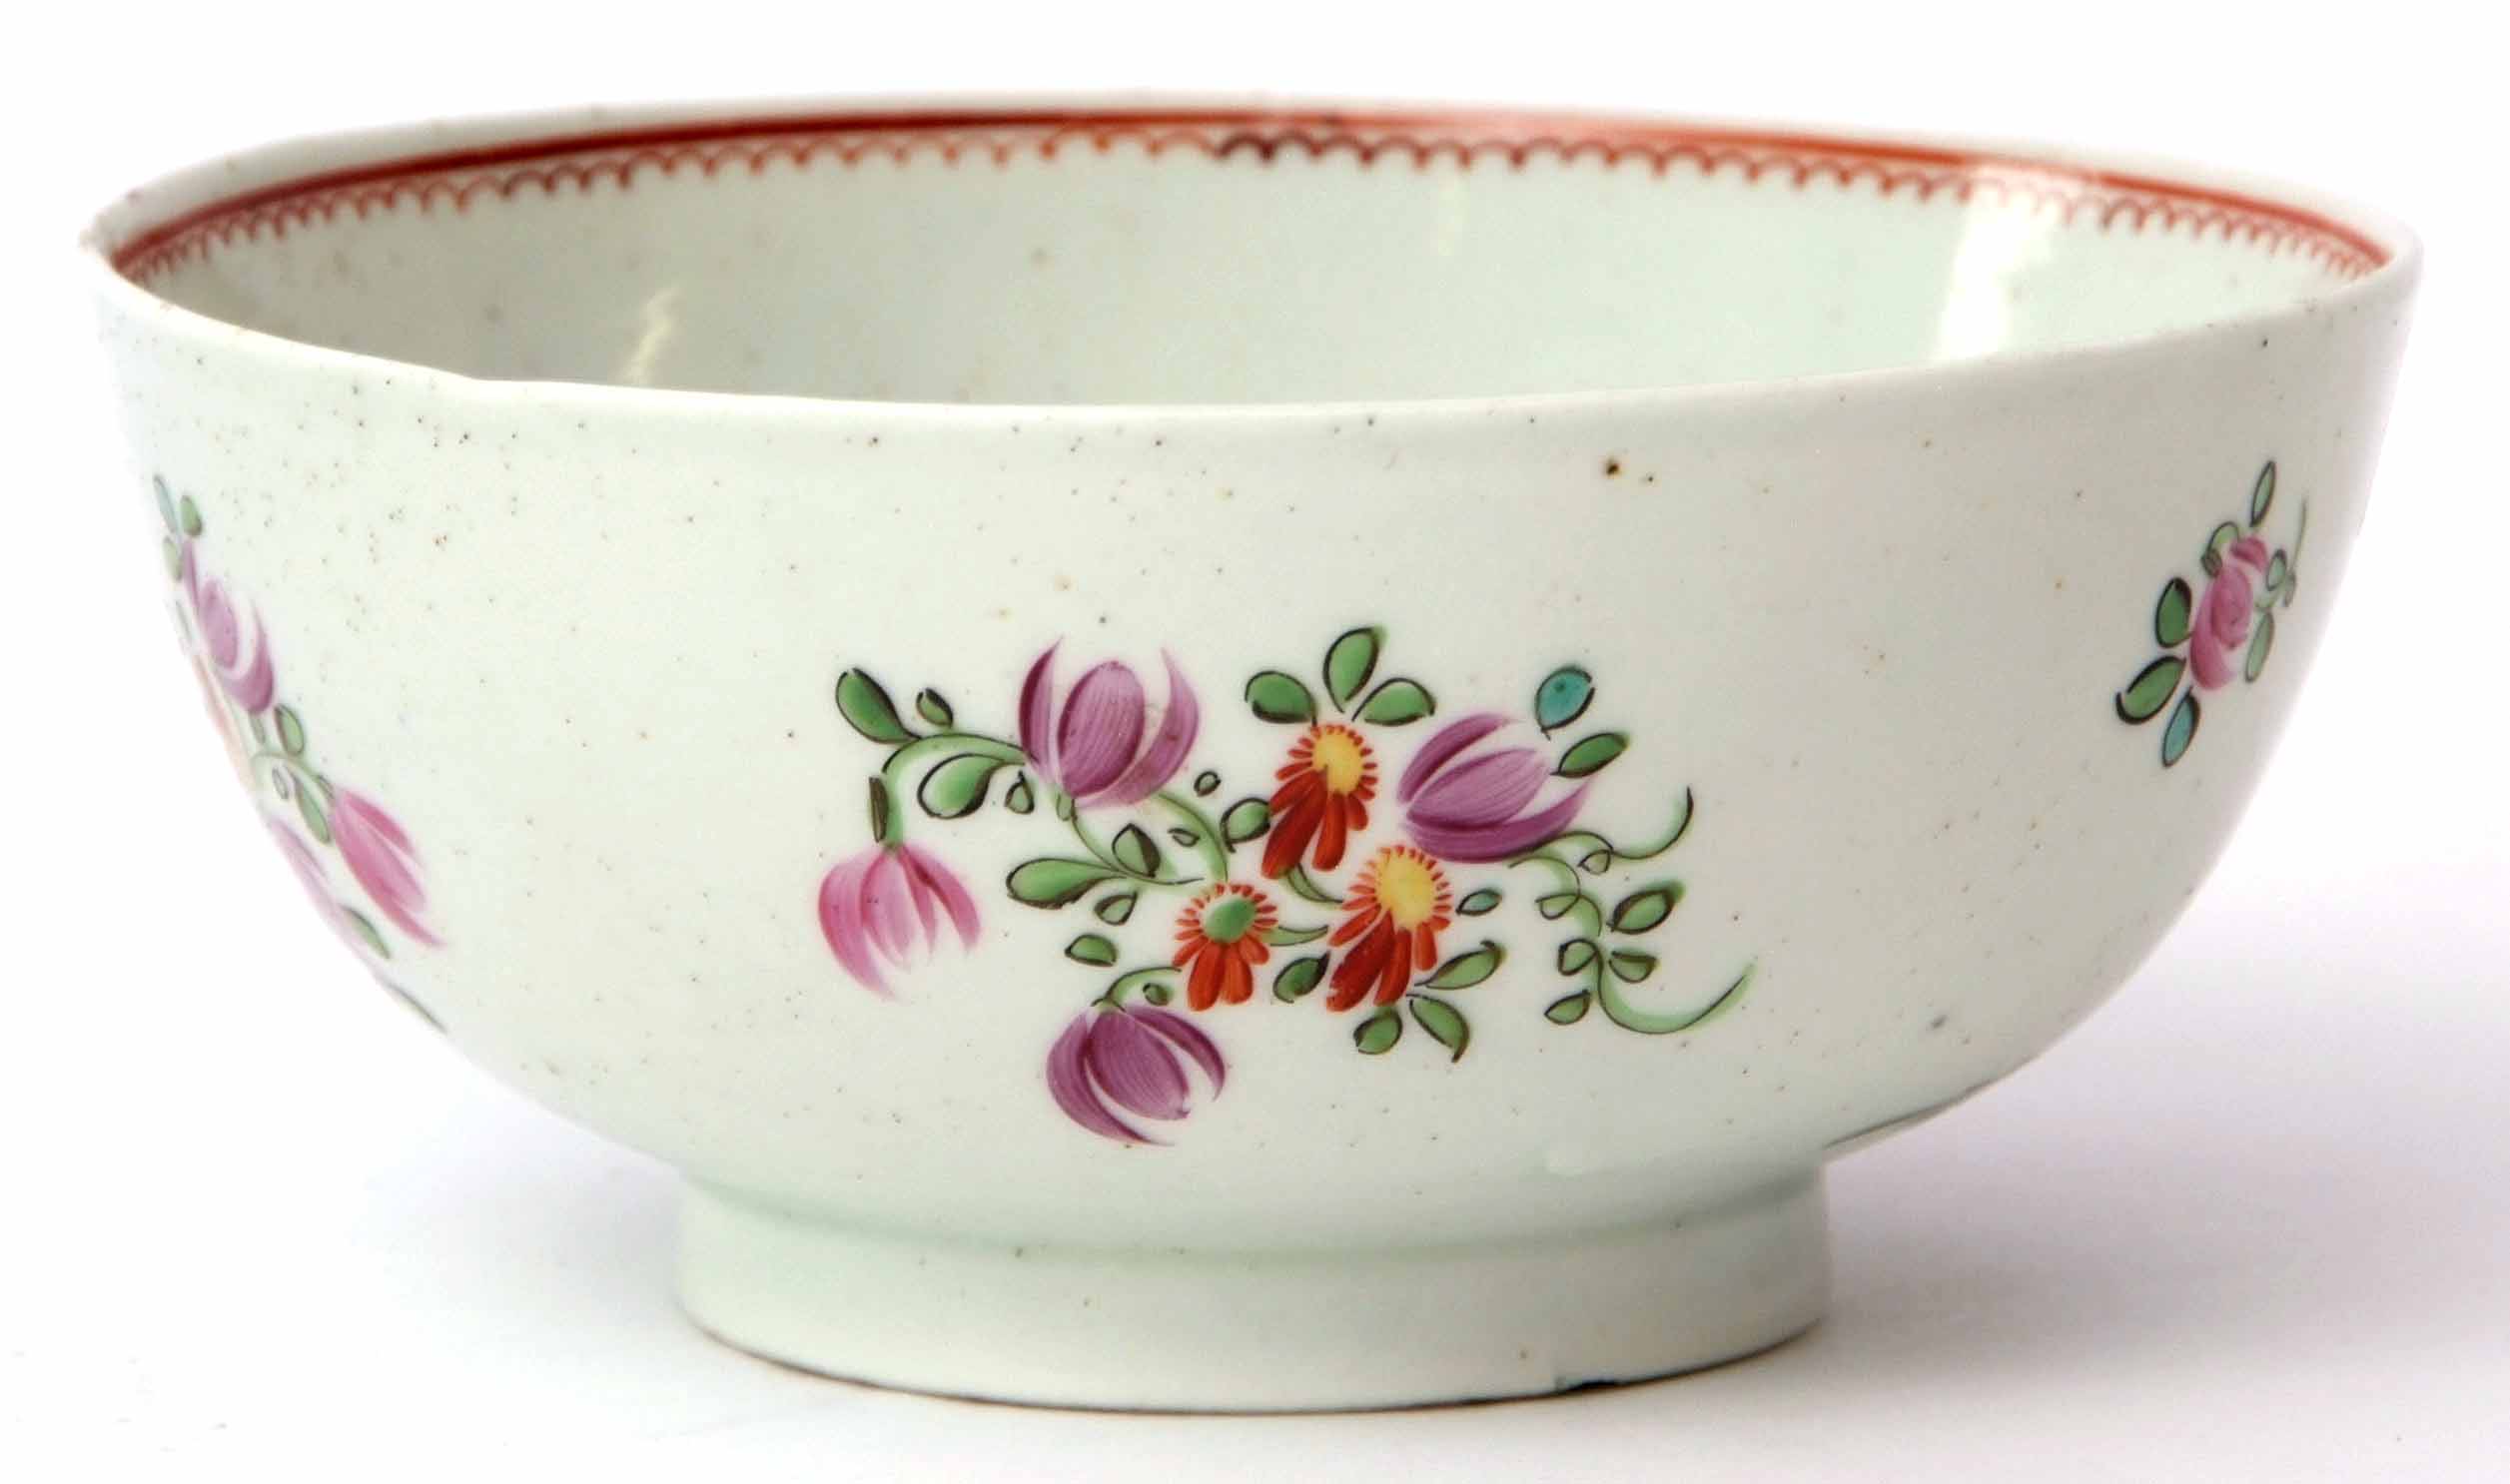 Lowestoft slop bowl circa 1780, with a Thomas Rose design in polychrome enamels, 16cm diam - Image 2 of 4